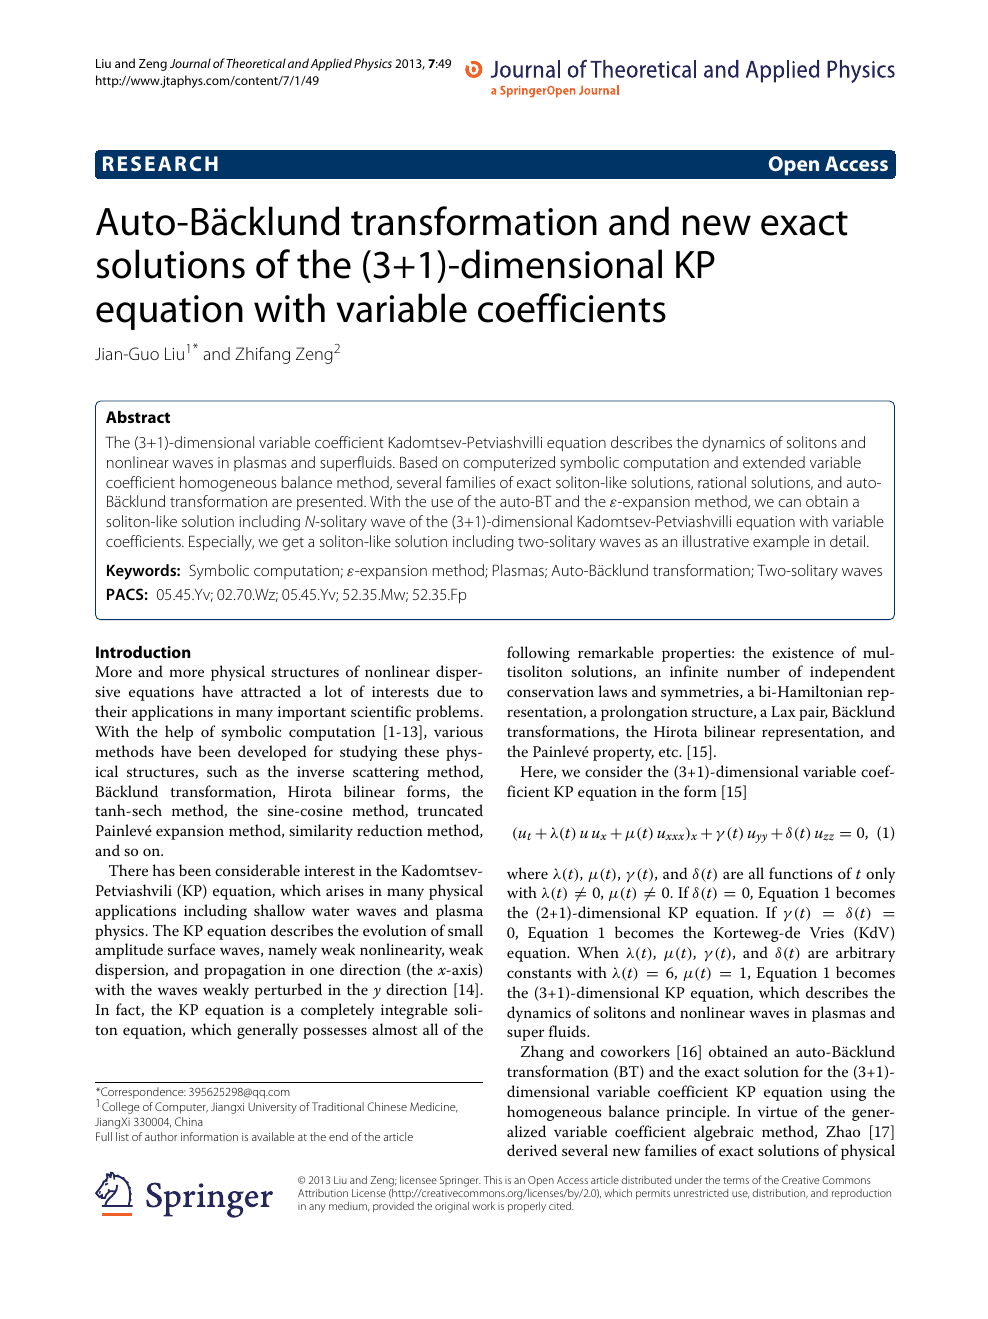 Auto Backlund Transformation And New Exact Solutions Of The 3 1 Dimensional Kp Equation With Variable Coefficients Topic Of Research Paper In Mathematics Download Scholarly Article Pdf And Read For Free On Cyberleninka Open